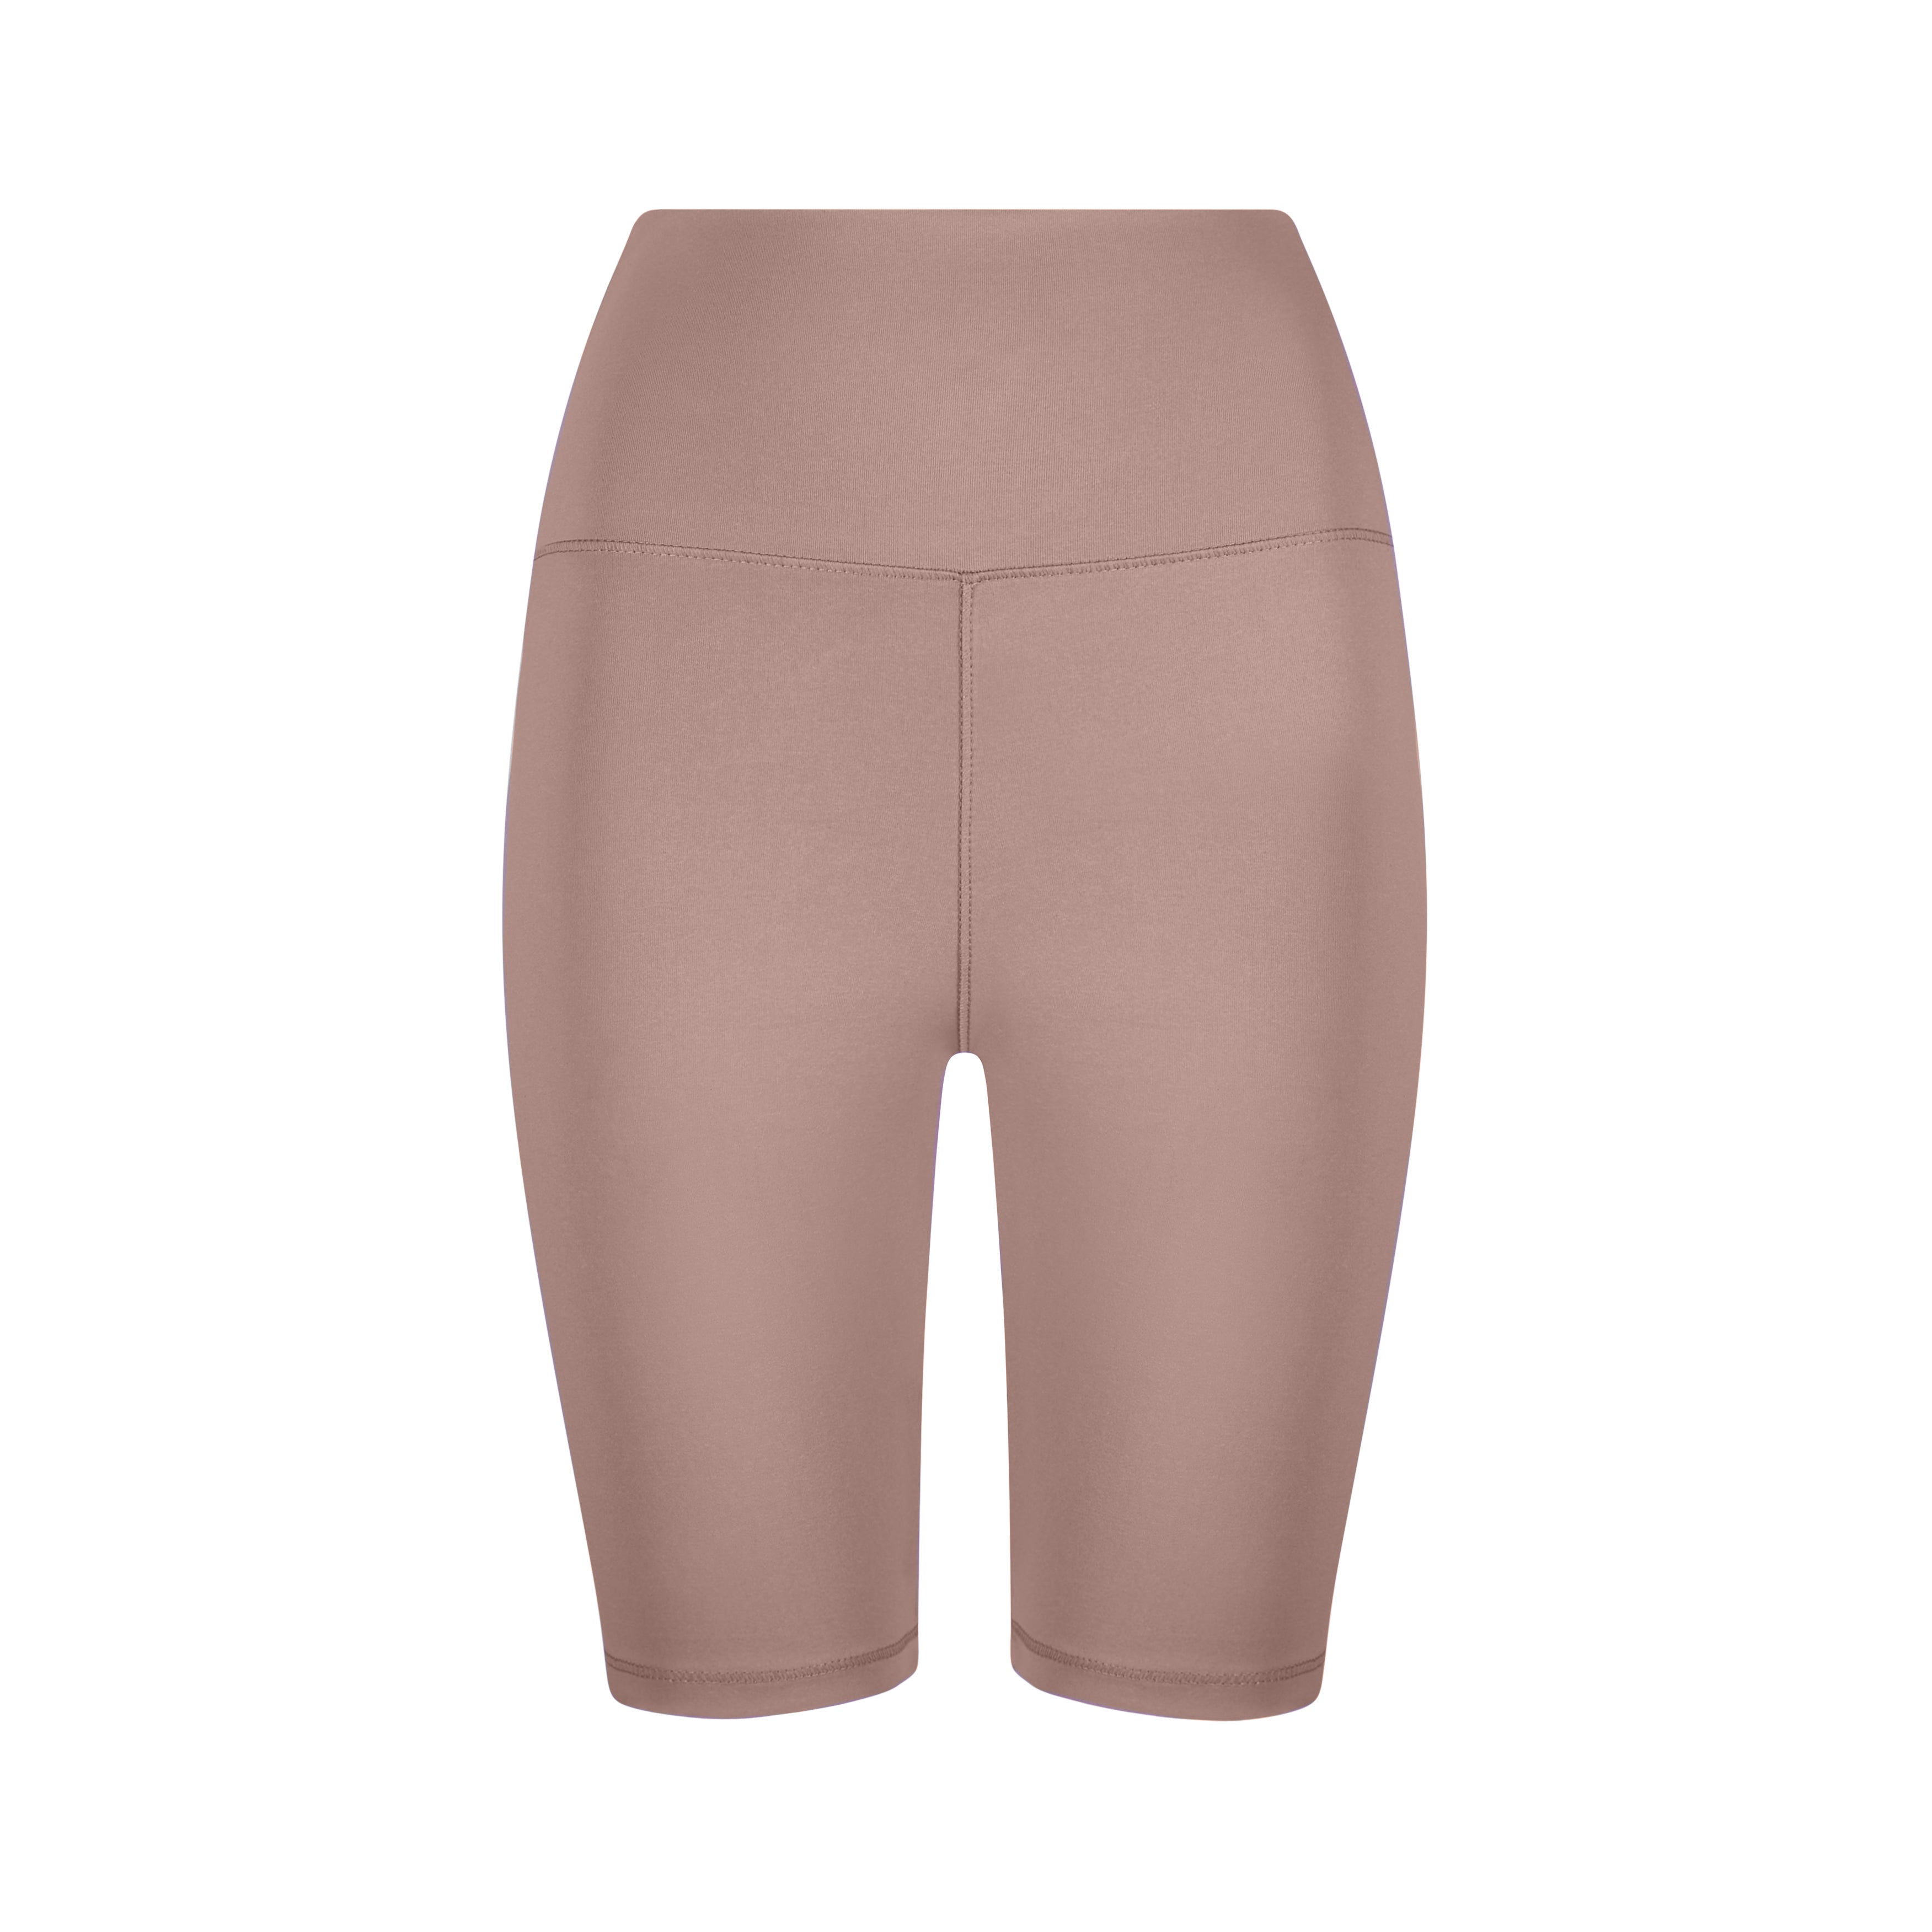 Dusty Pink Cycle short